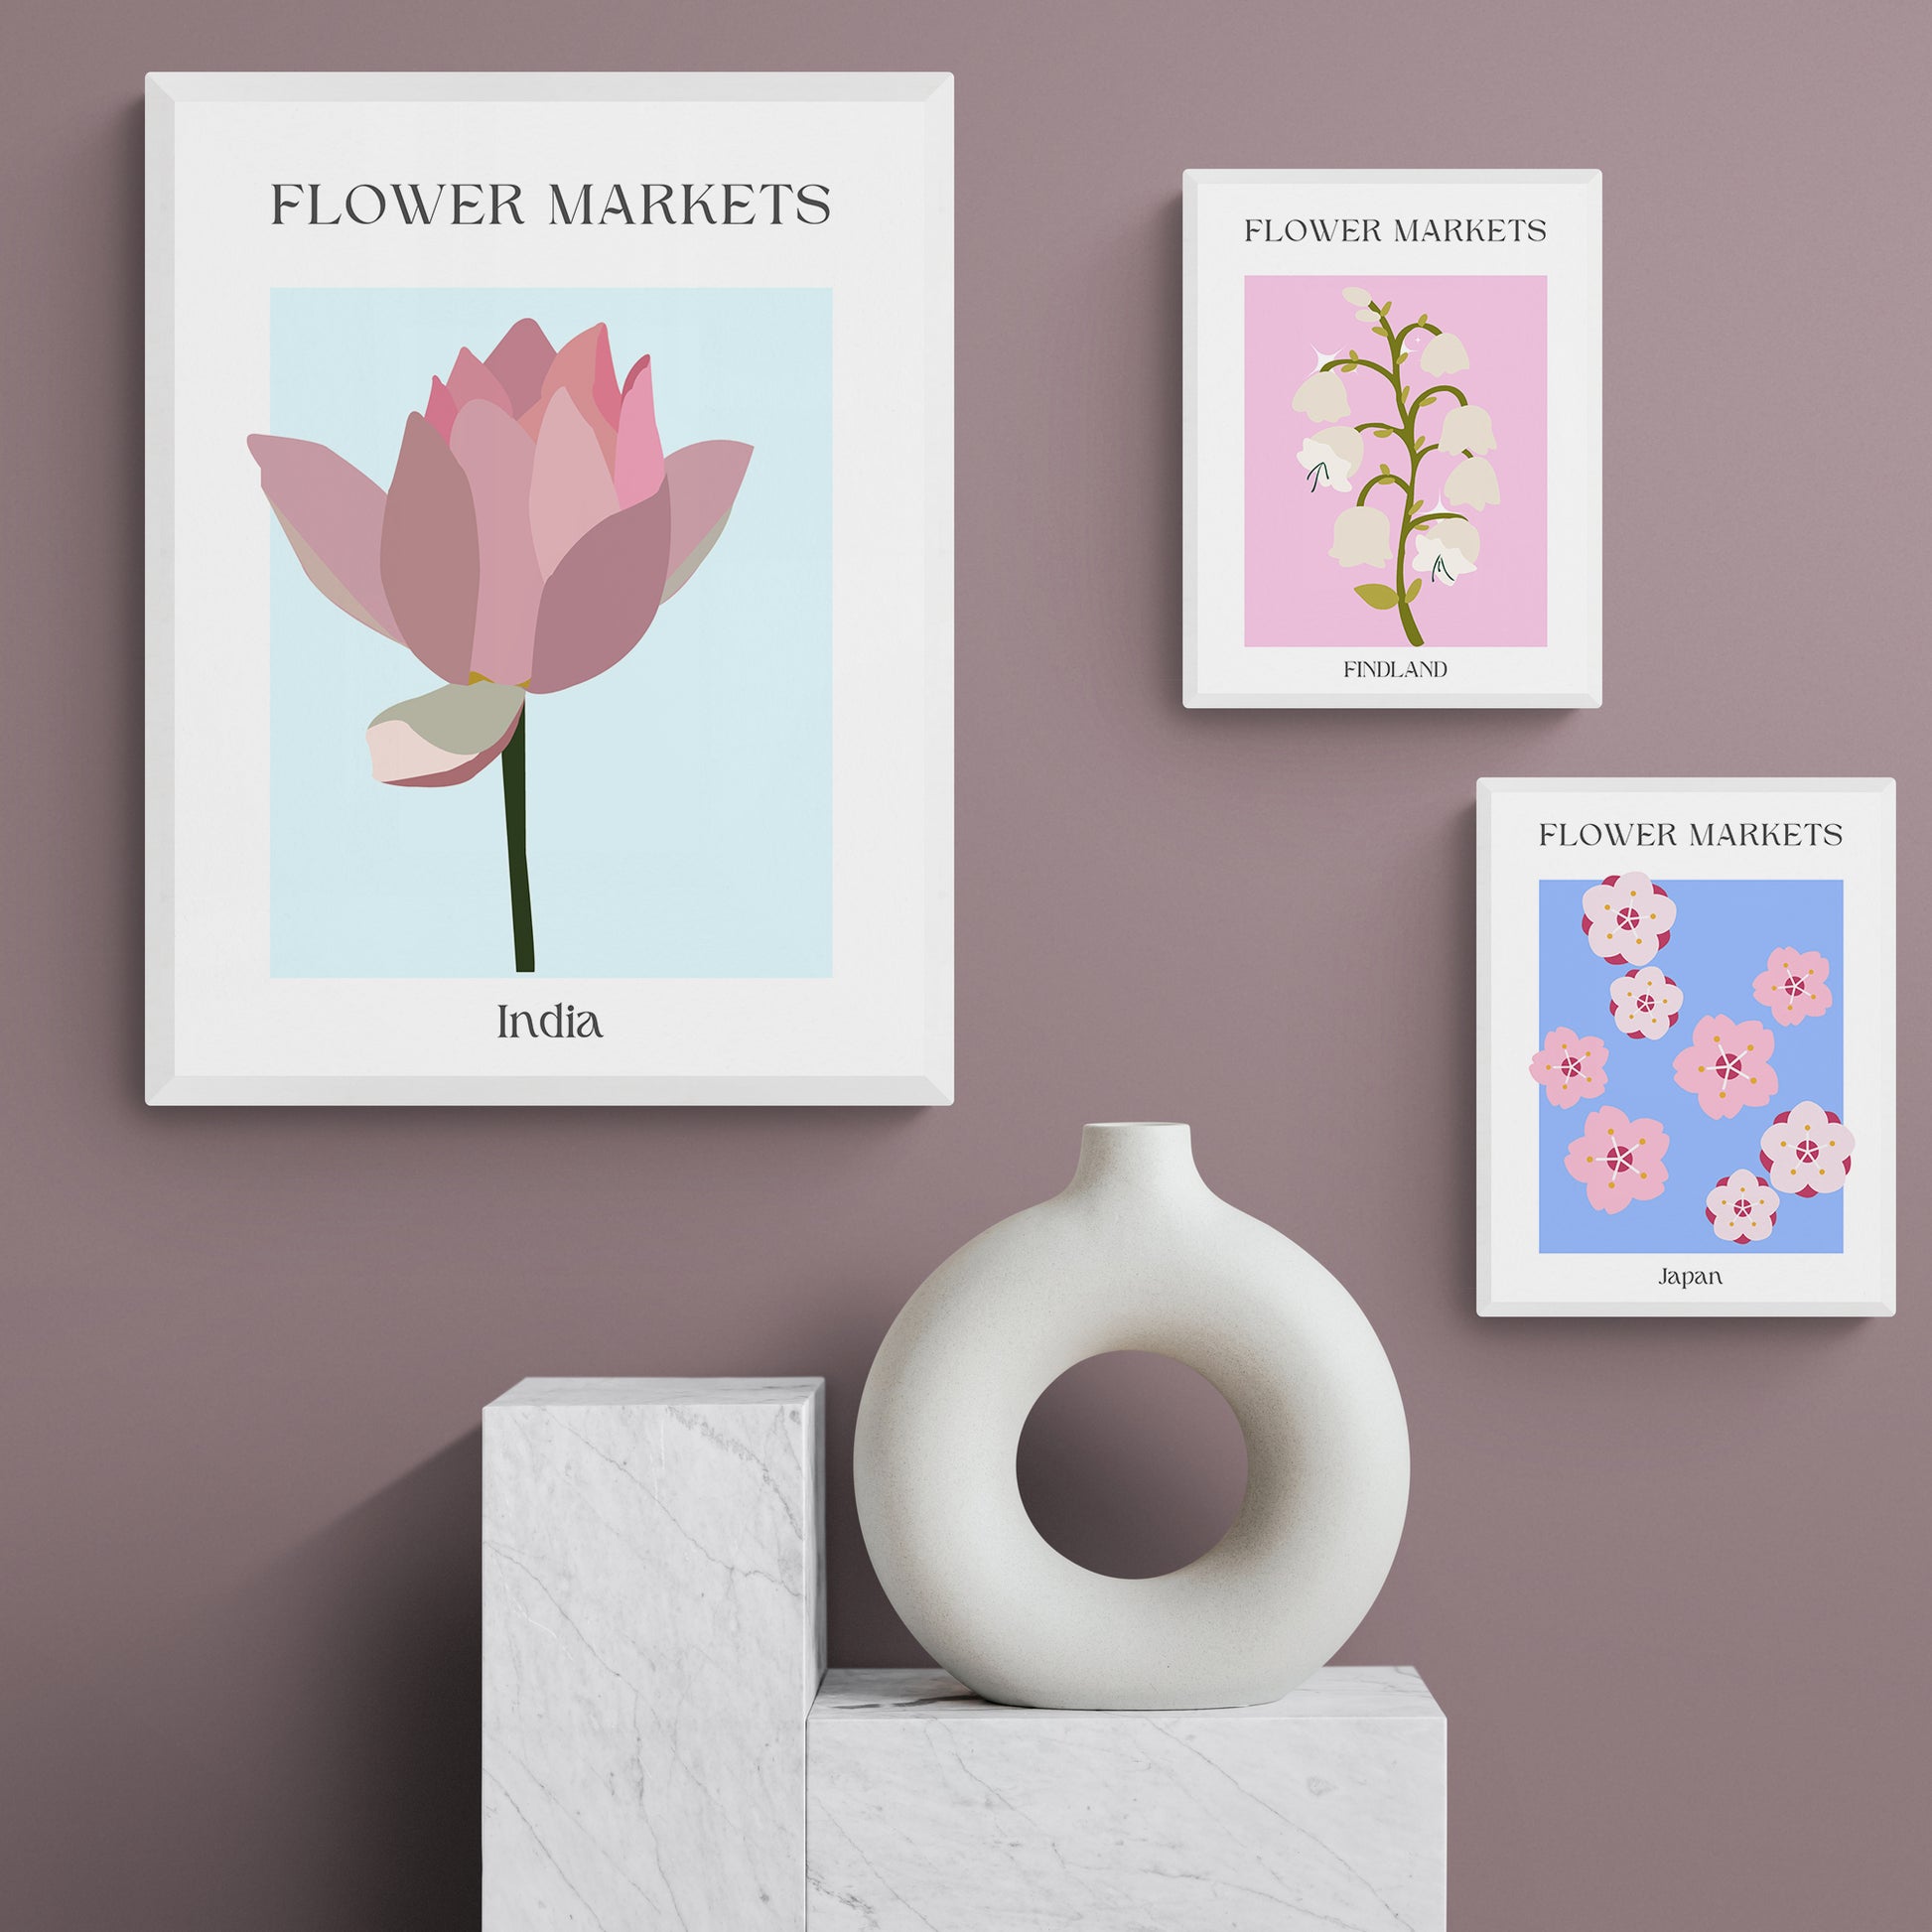 Discover the Portugal 2 Flowers Market Print, a vibrant wall art collection with 98types of colourful prints that bring modern Scandivanian style to any home. Featuring trendy pastel colors, abstract flowers, shapes in color, poster from shapes and formes, and wall art prints, this wall art collection brings beautiful, timeless designs inspired by the vibrant colors of the Flower Markets. Transform any room into an art gallery with this one-of-a-kind collection.